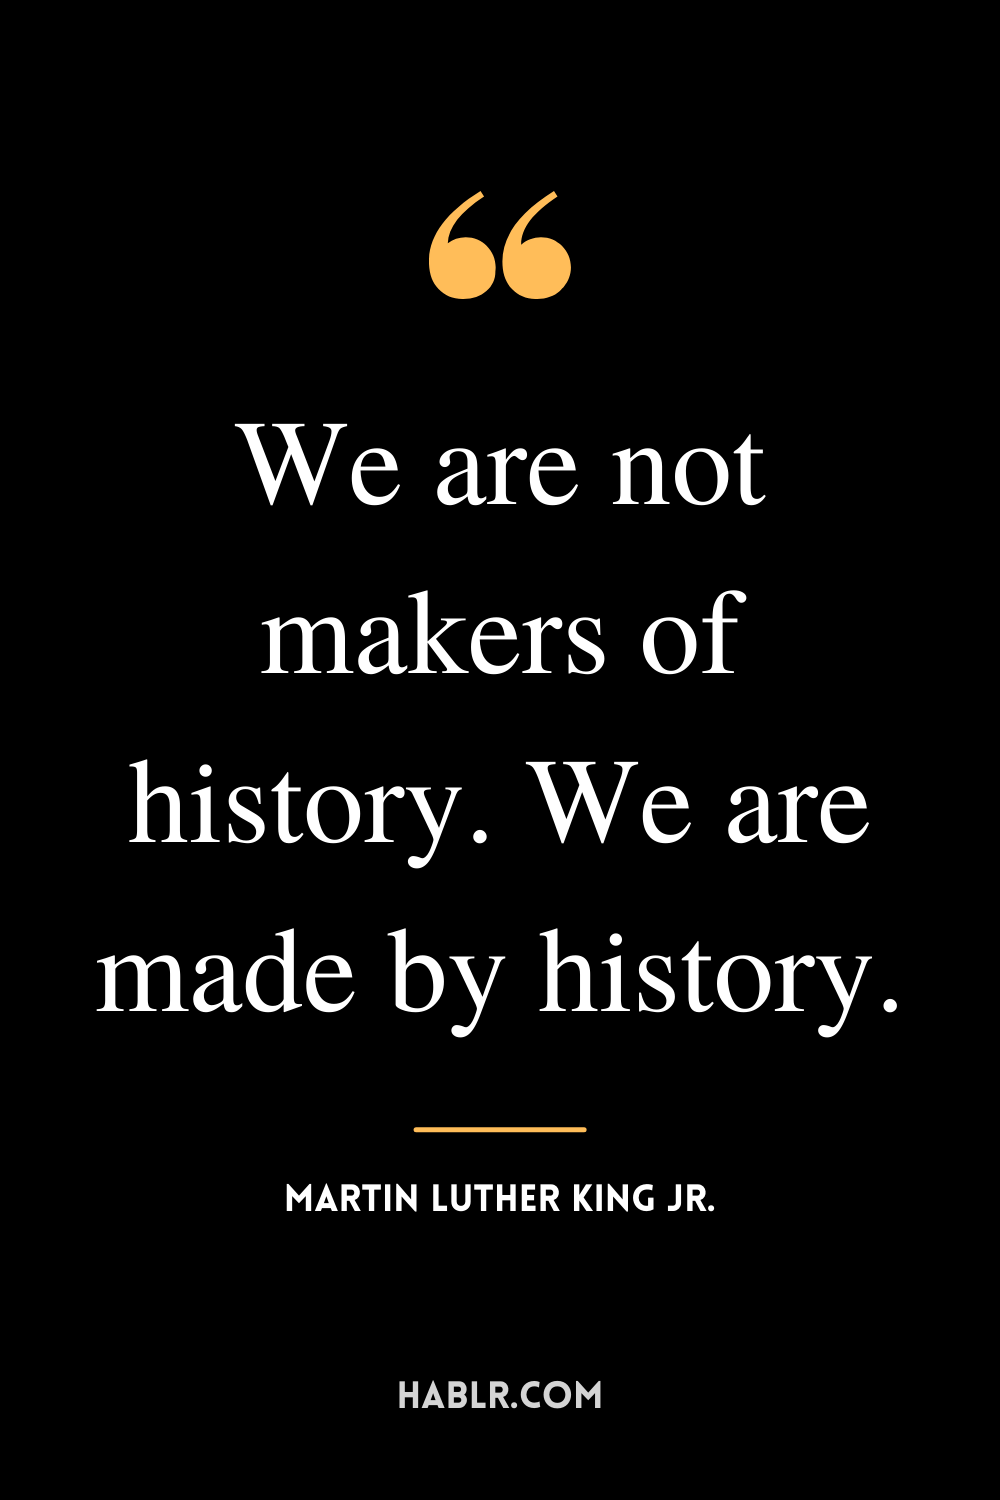 “We are not makers of history. We are made by history.” -Martin Luther King Jr.